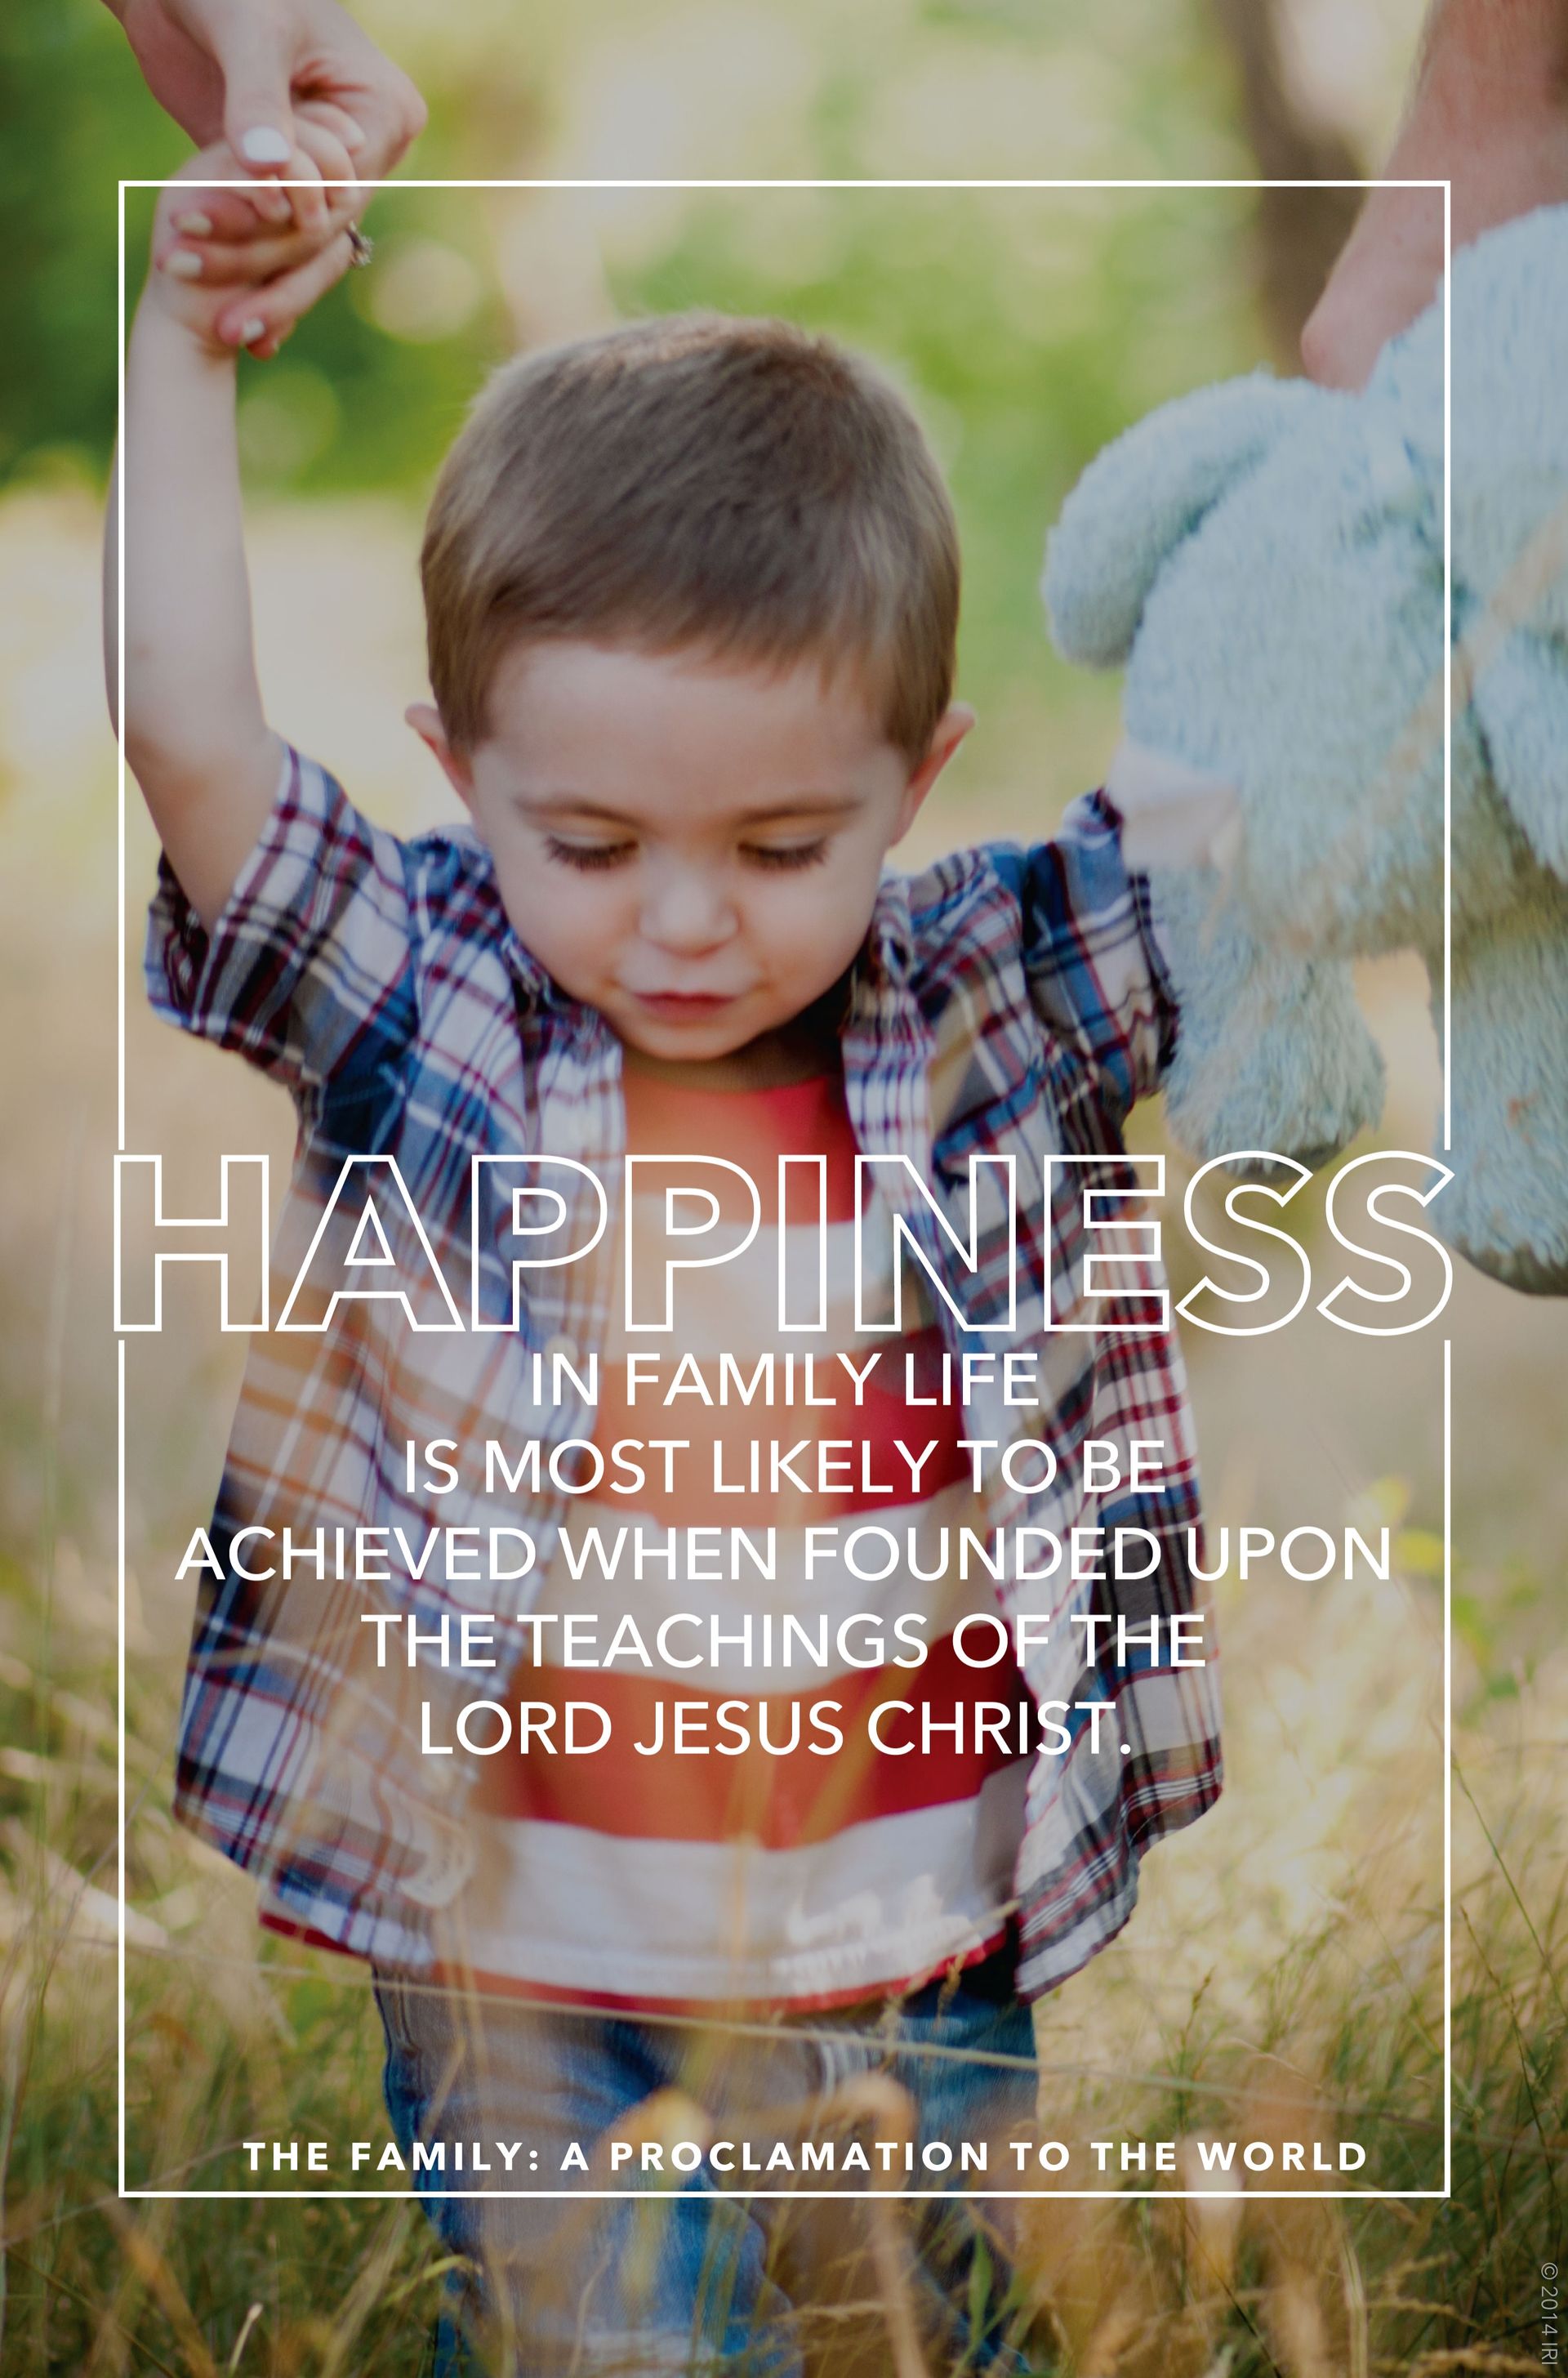 “Happiness in family life is most likely to be achieved when founded upon the teachings of the Lord Jesus Christ.”—“The Family: A Proclamation to the World” © undefined ipCode 1.